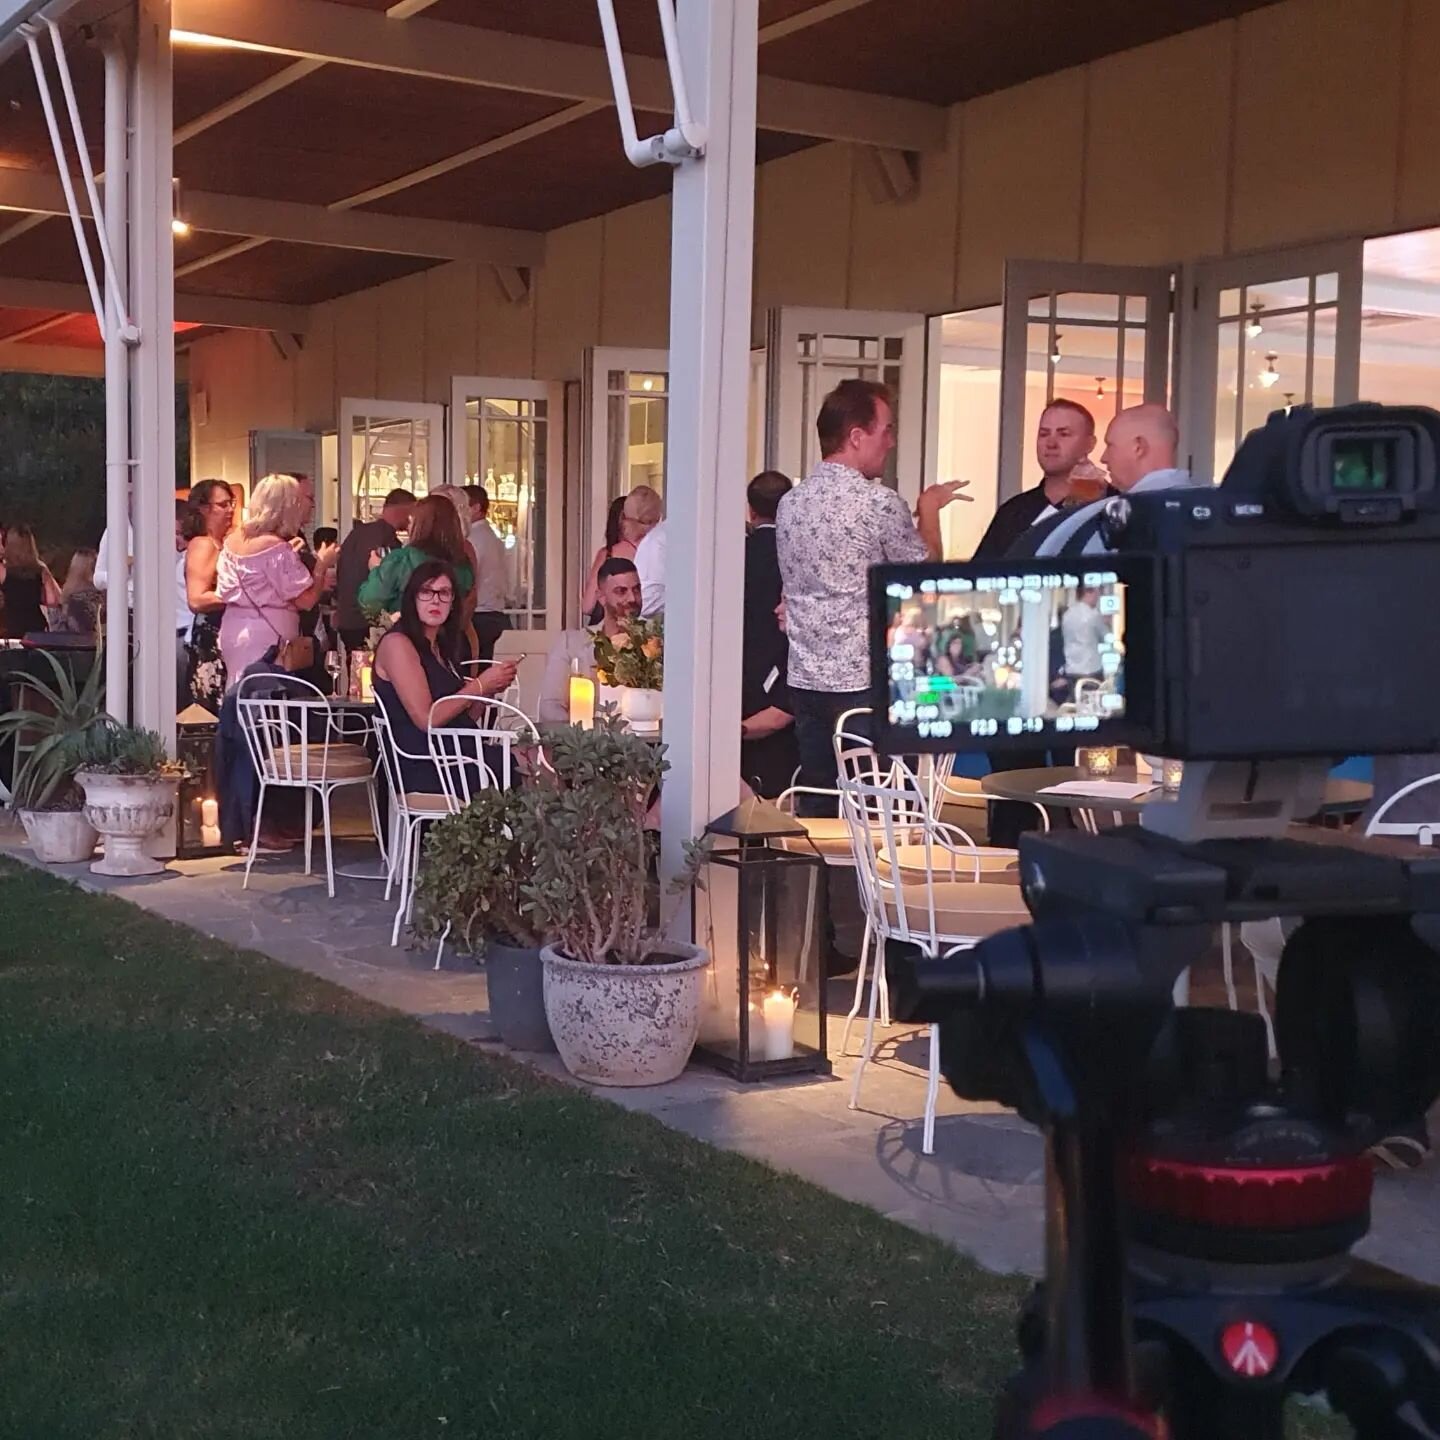 Filming events videos in Brisbane #twilight #videoproduction #party #holidays #xmasparty #videography